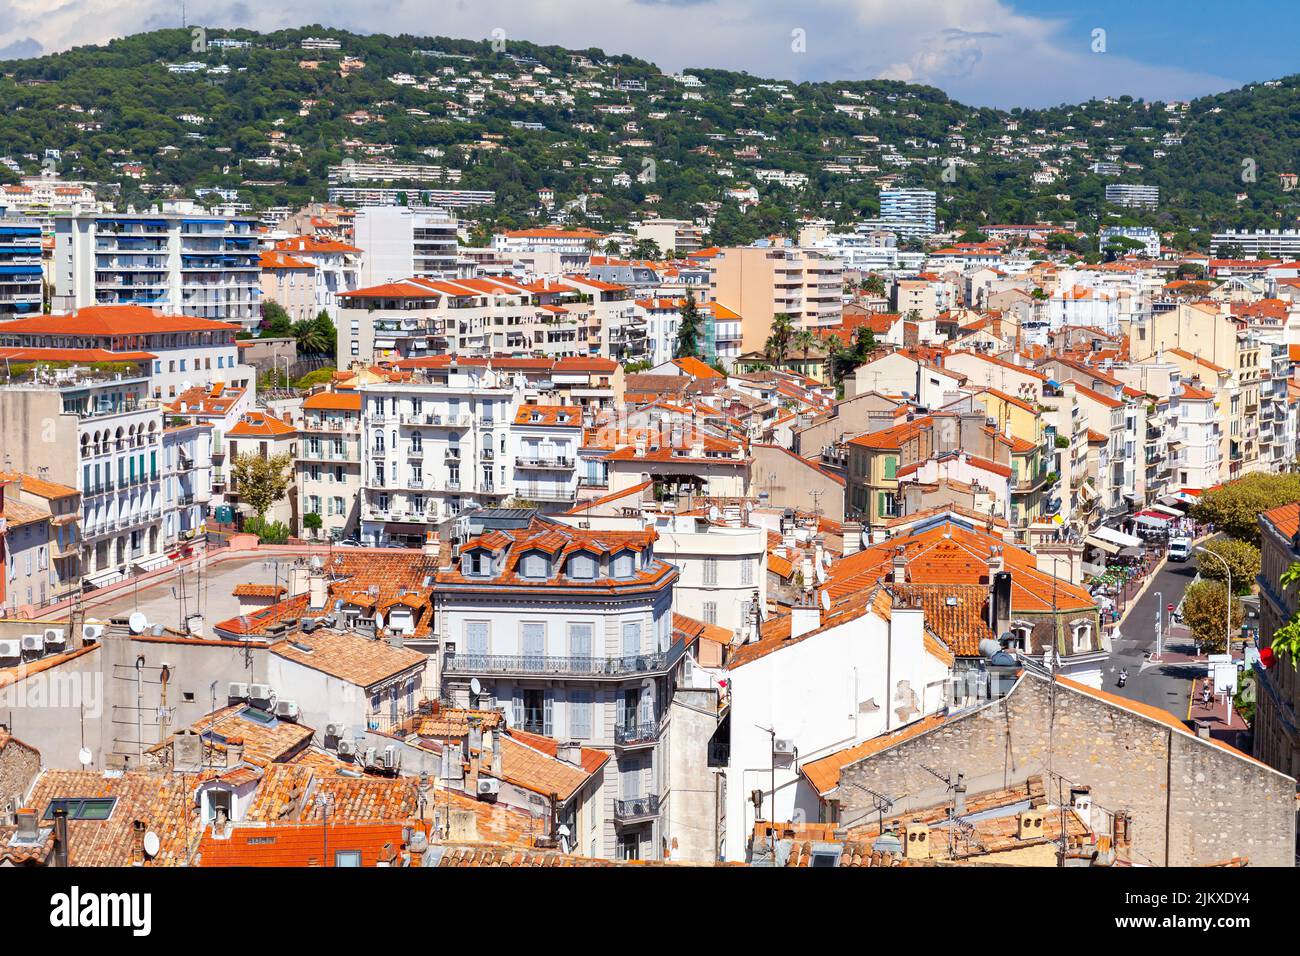 Residential houses with red tiled roofs are under cloudy sky on a sunny day. Aerial view of Cannes old town, France Stock Photo